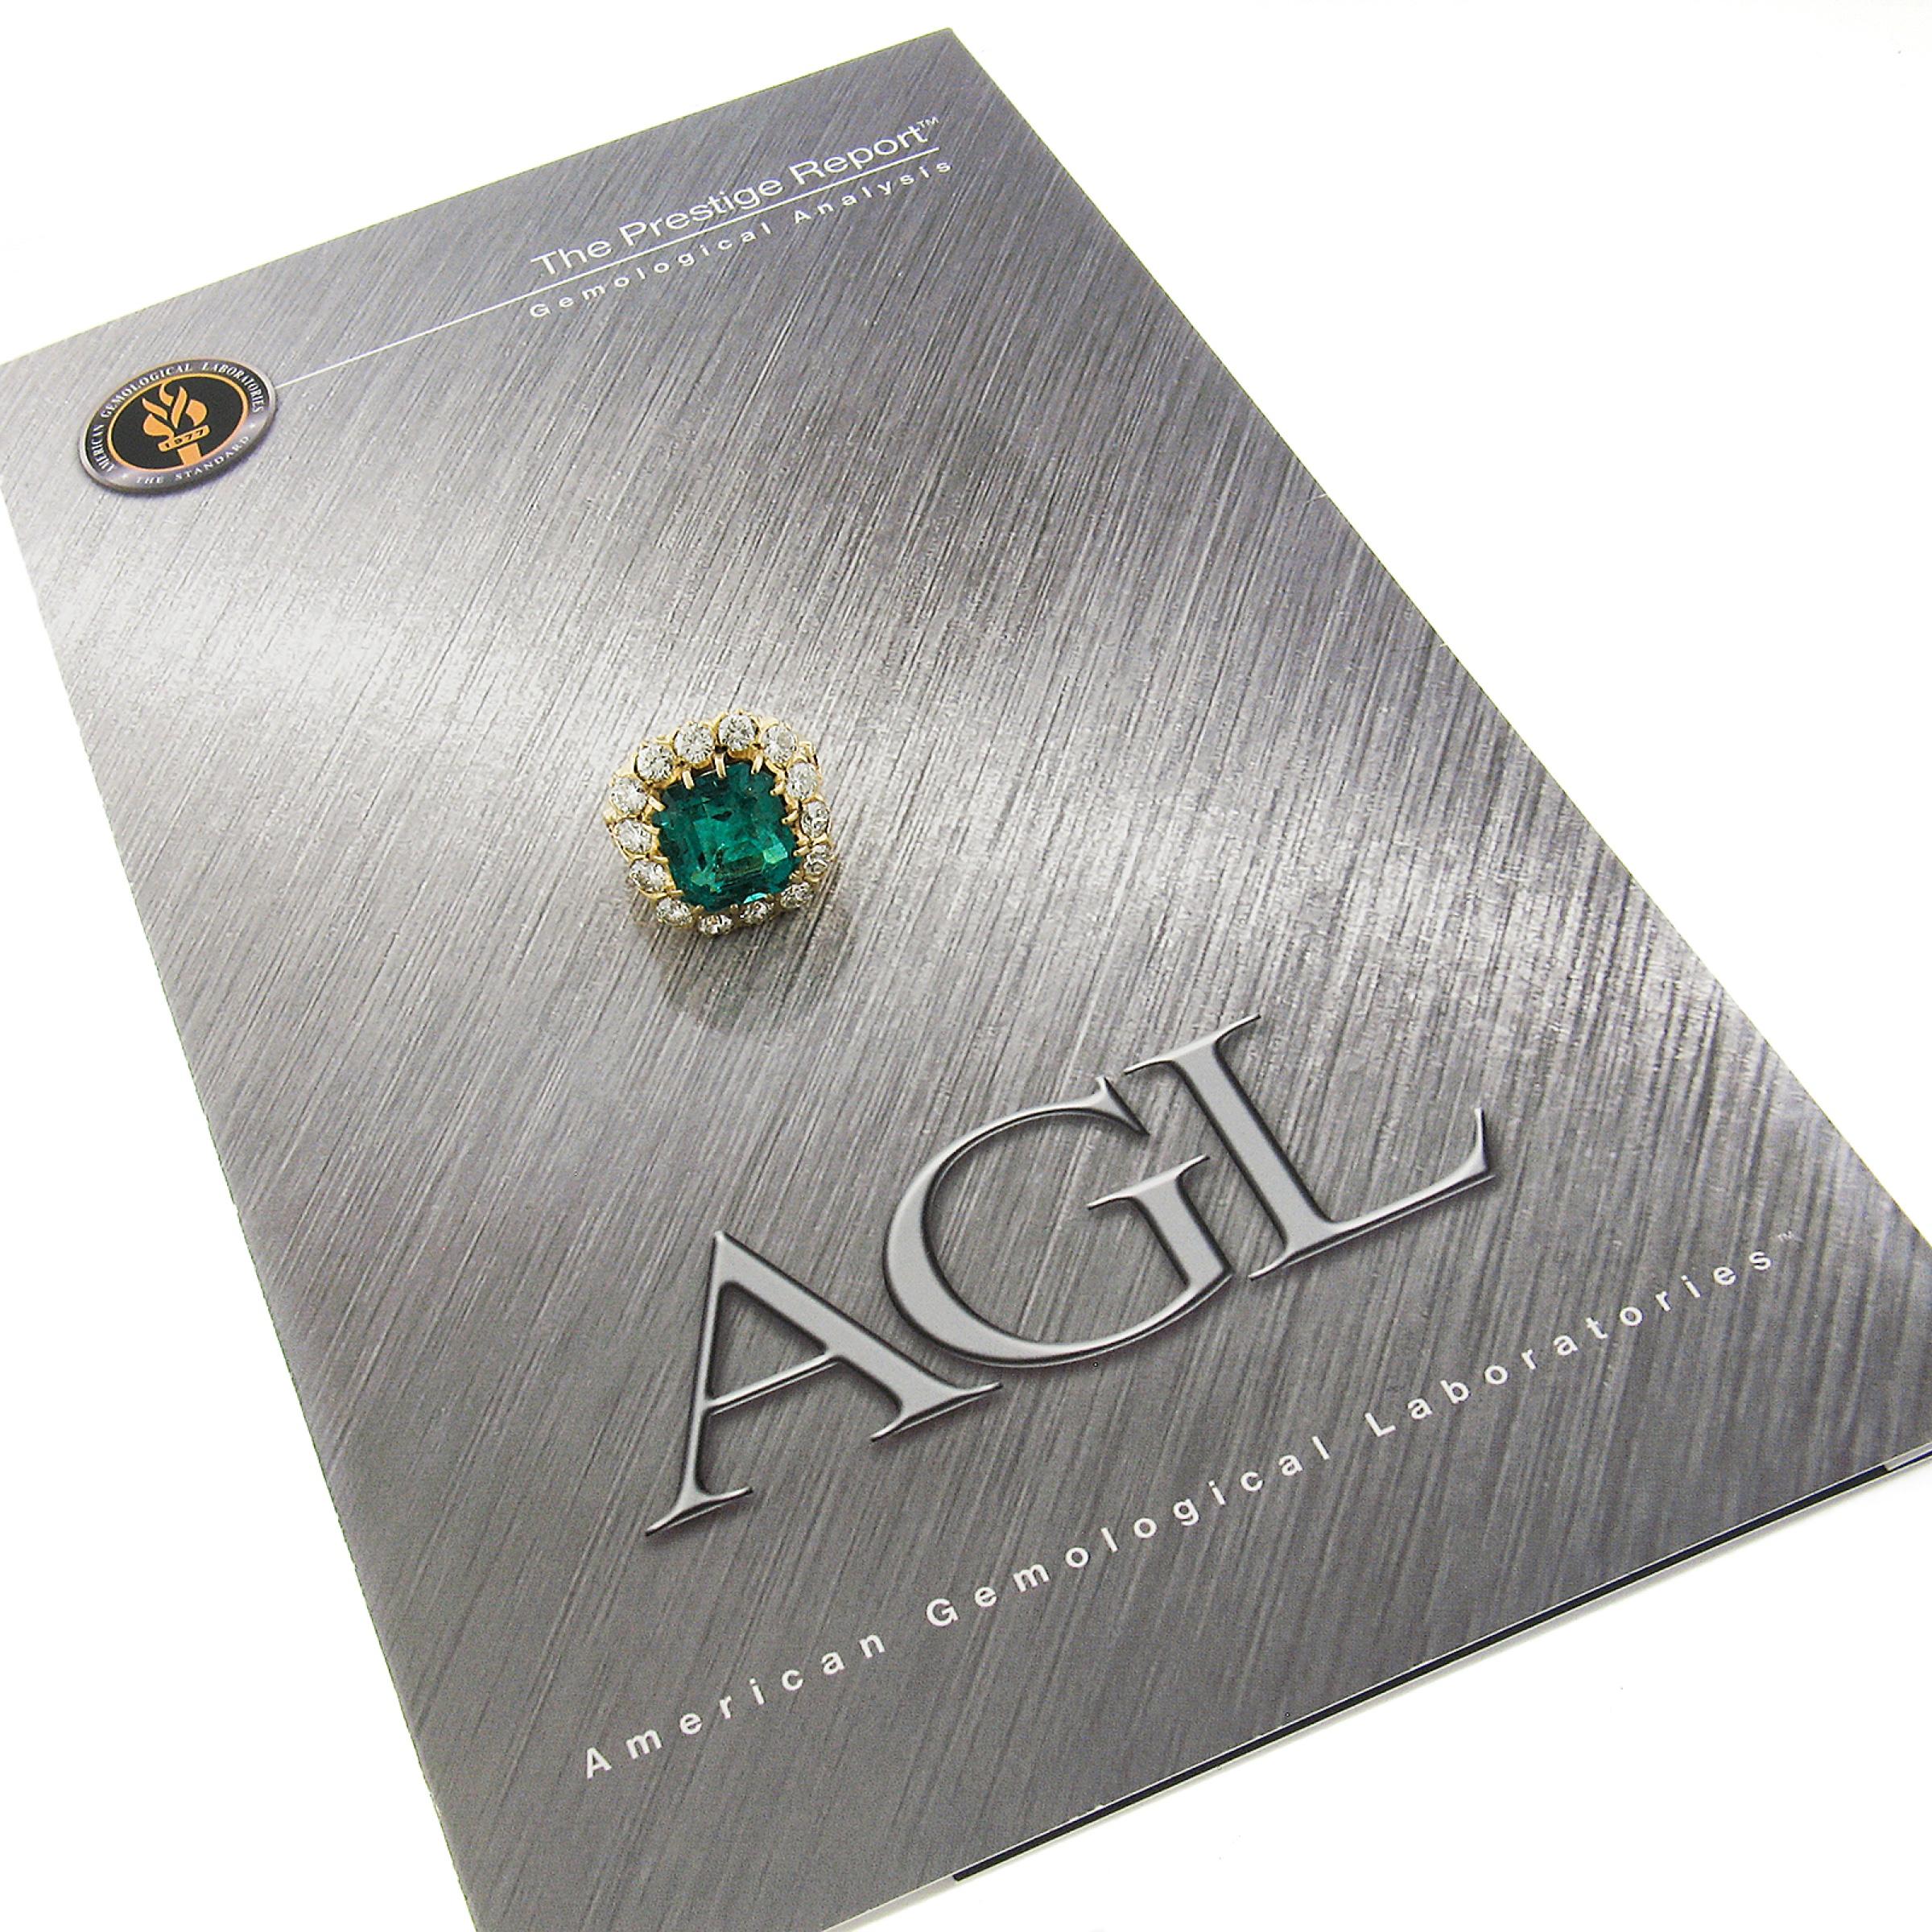 We're very excited to offer this dramatic emerald and diamond cocktail statement ring crafted in solid 18k gold, featuring a large, emerald cut, genuine emerald stone at the center of the ring and is AGL certified as being 100% natural mined stone